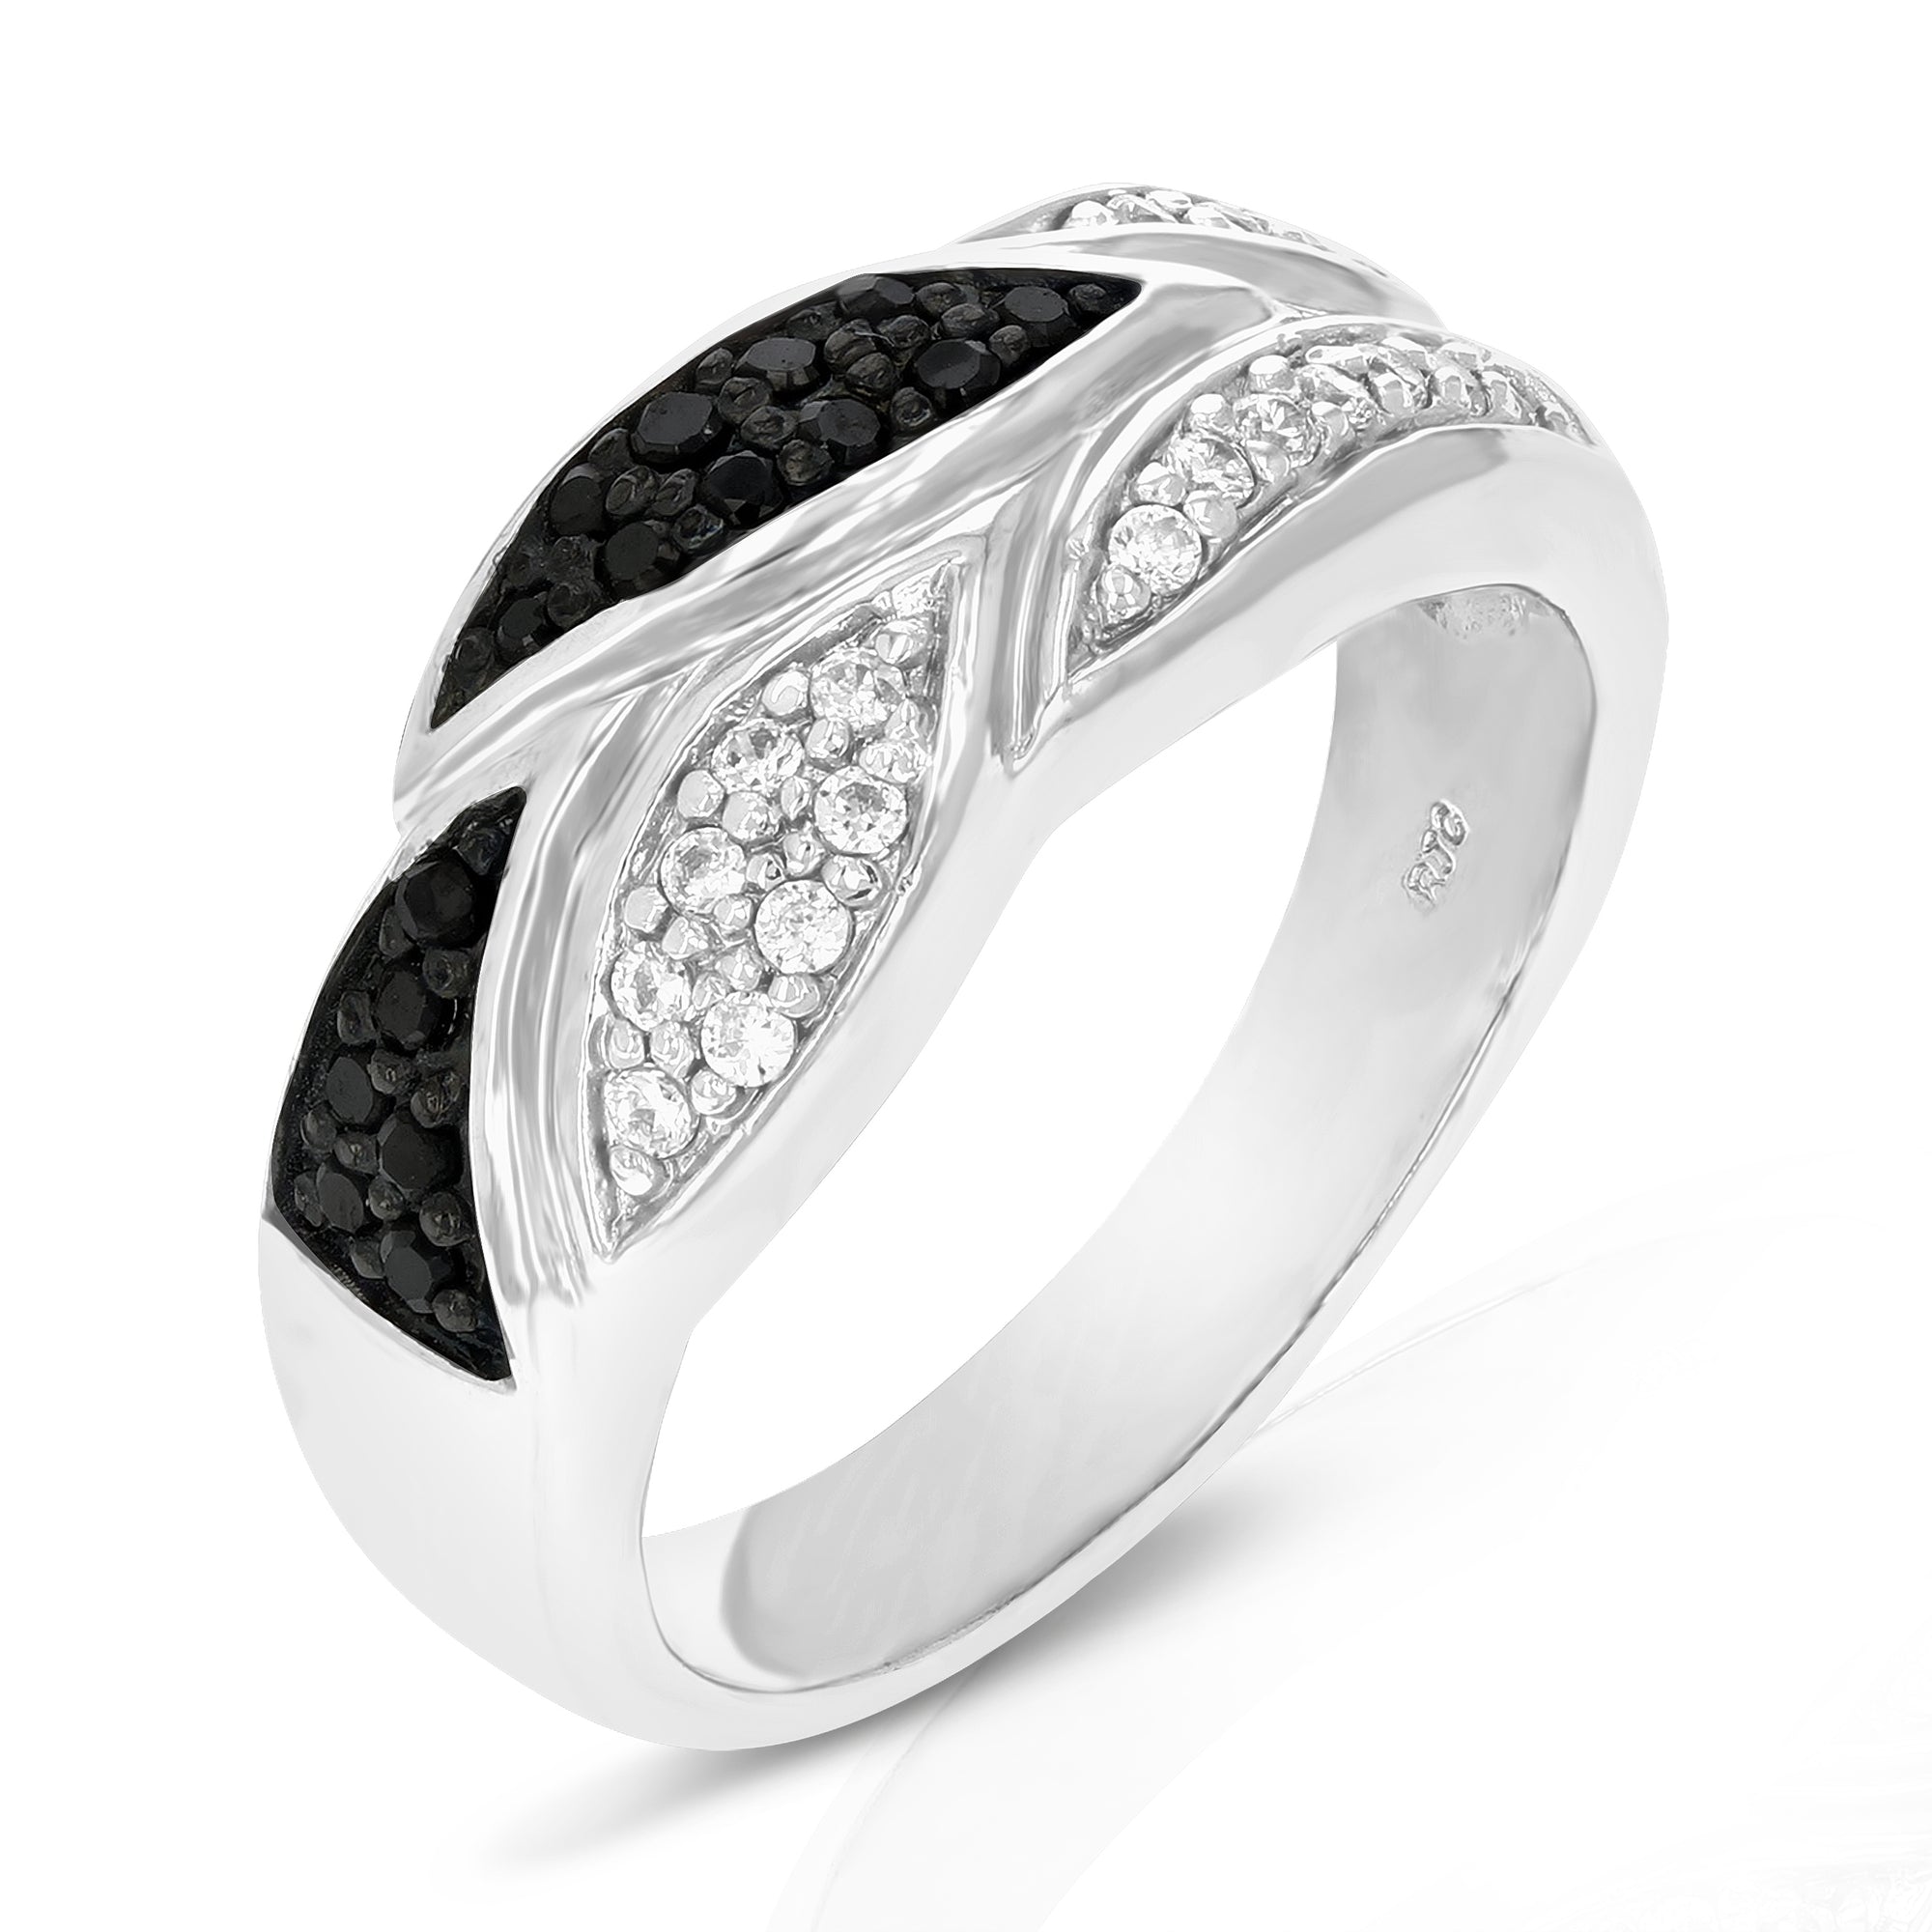 Sterling Silver Black Diamond Ring (1/3 cttw) Size 7